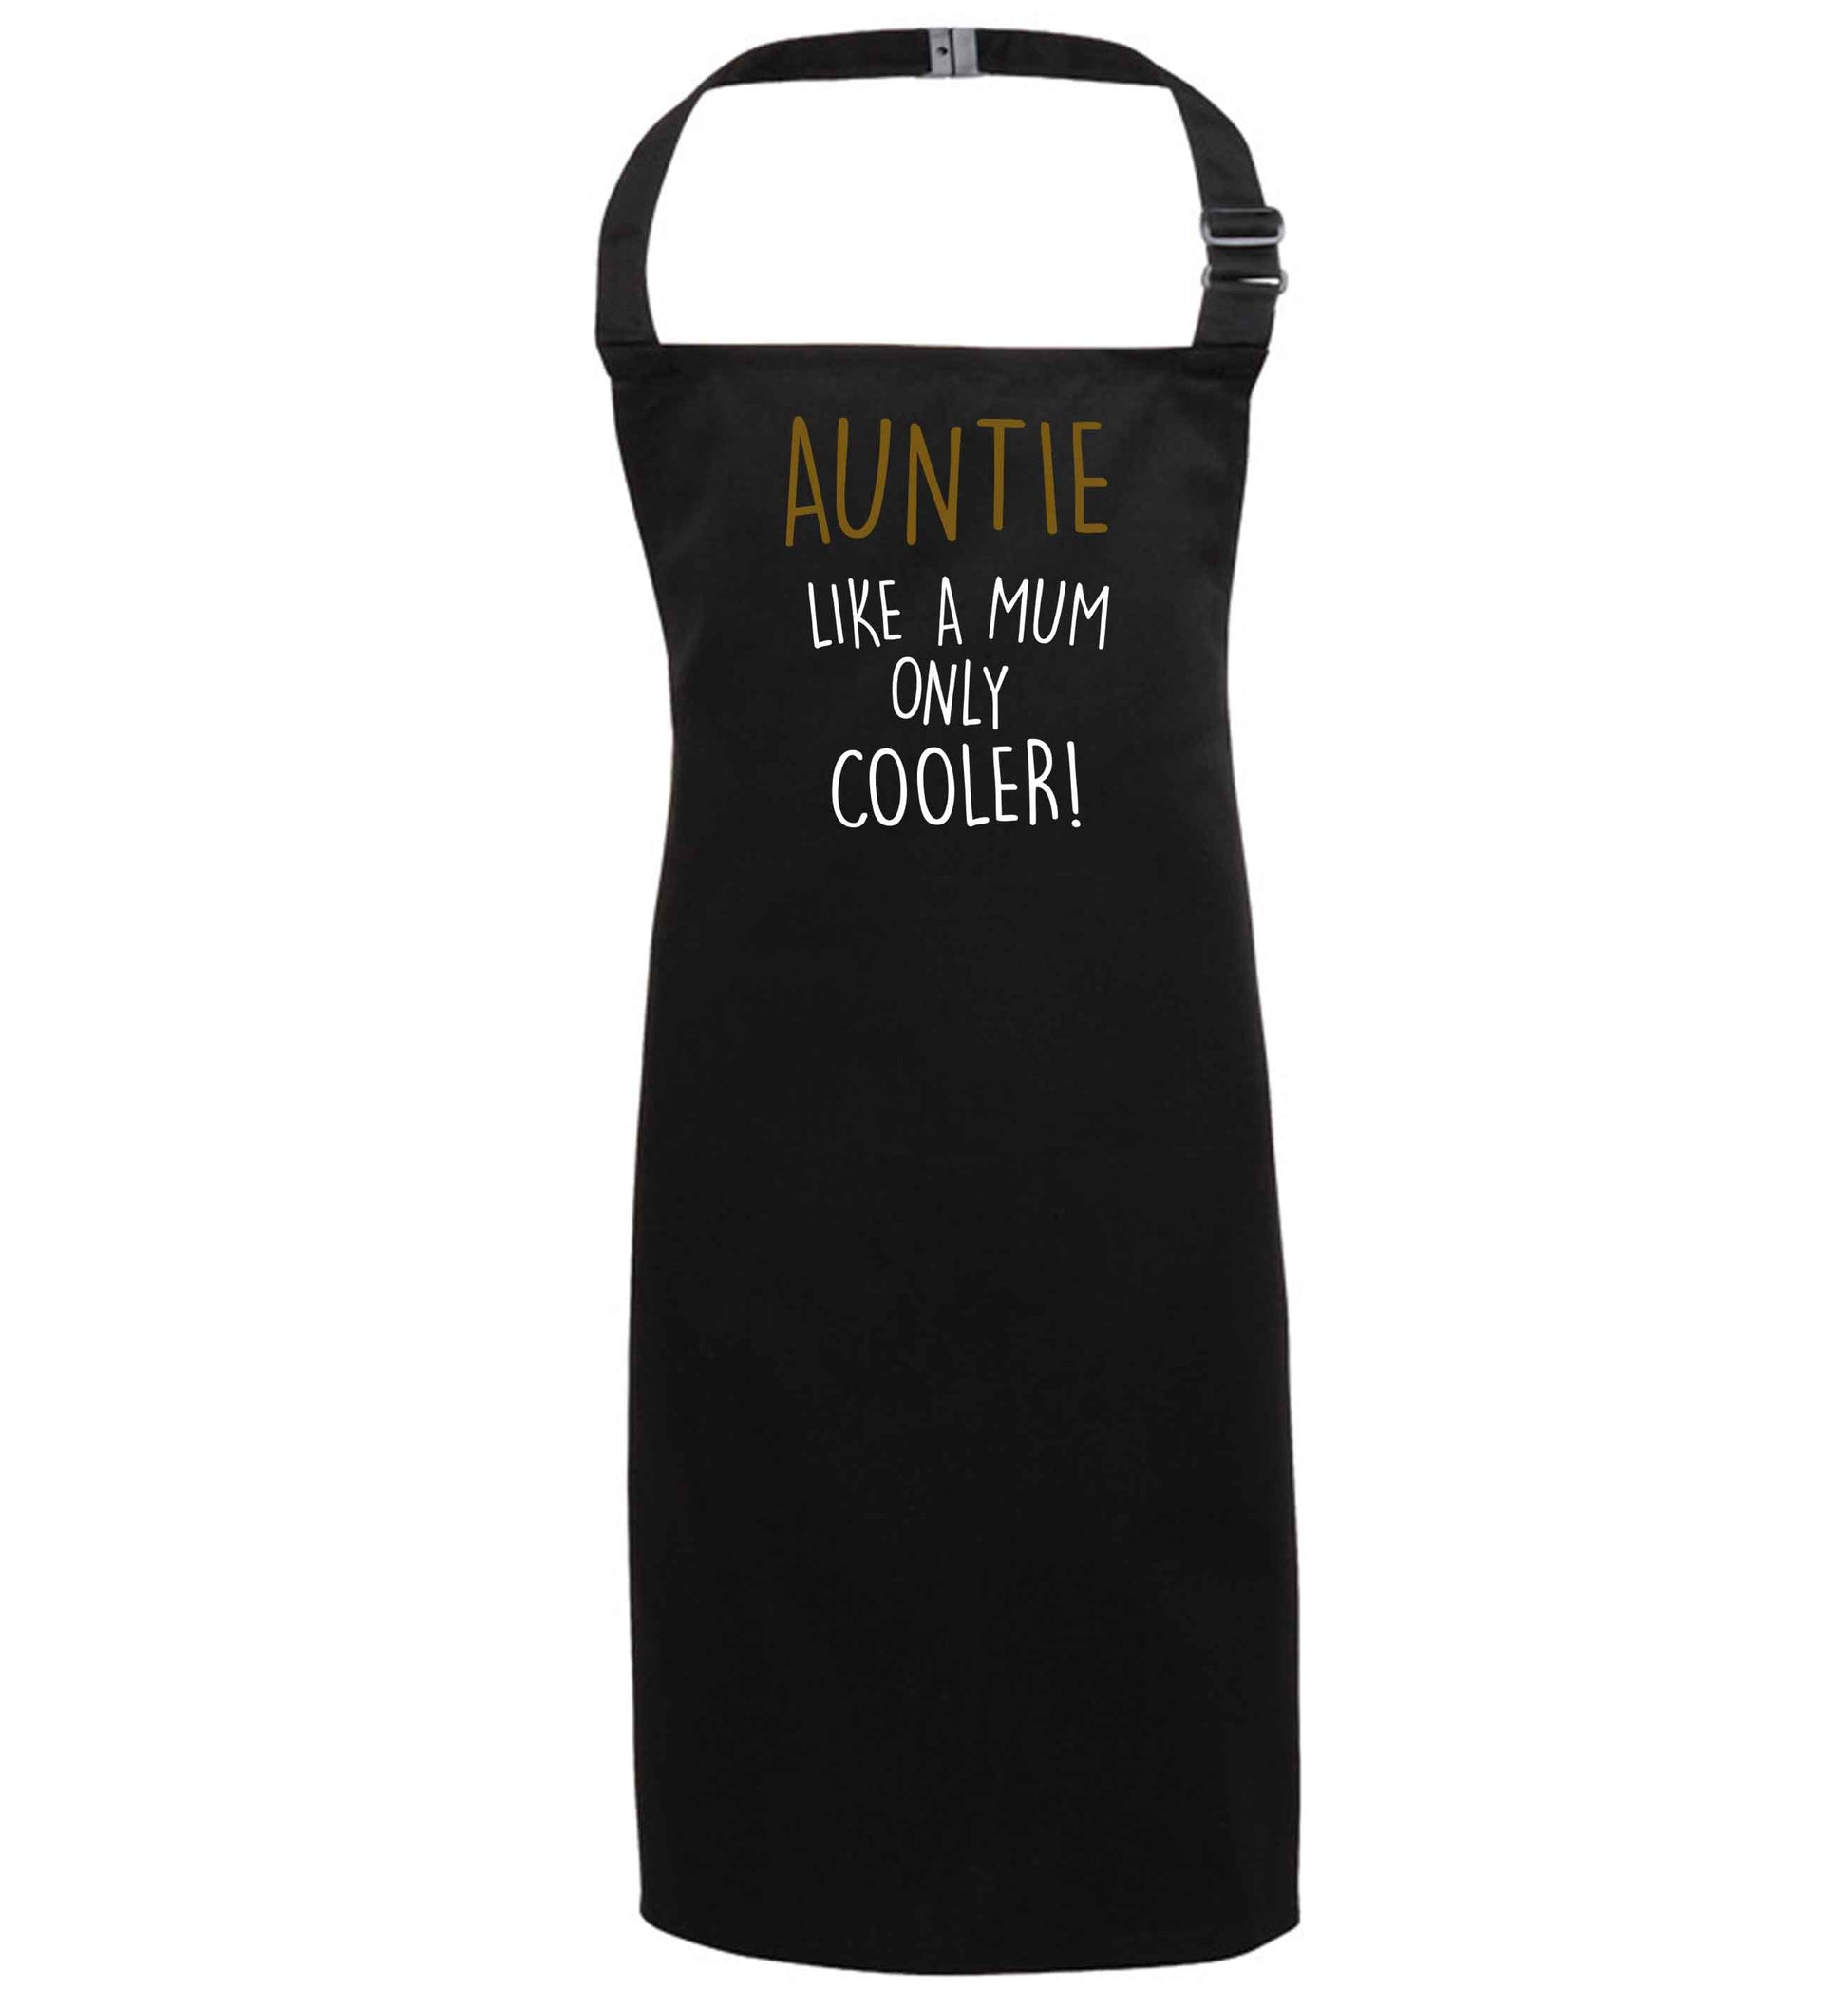 Auntie like a mum only cooler black apron 7-10 years